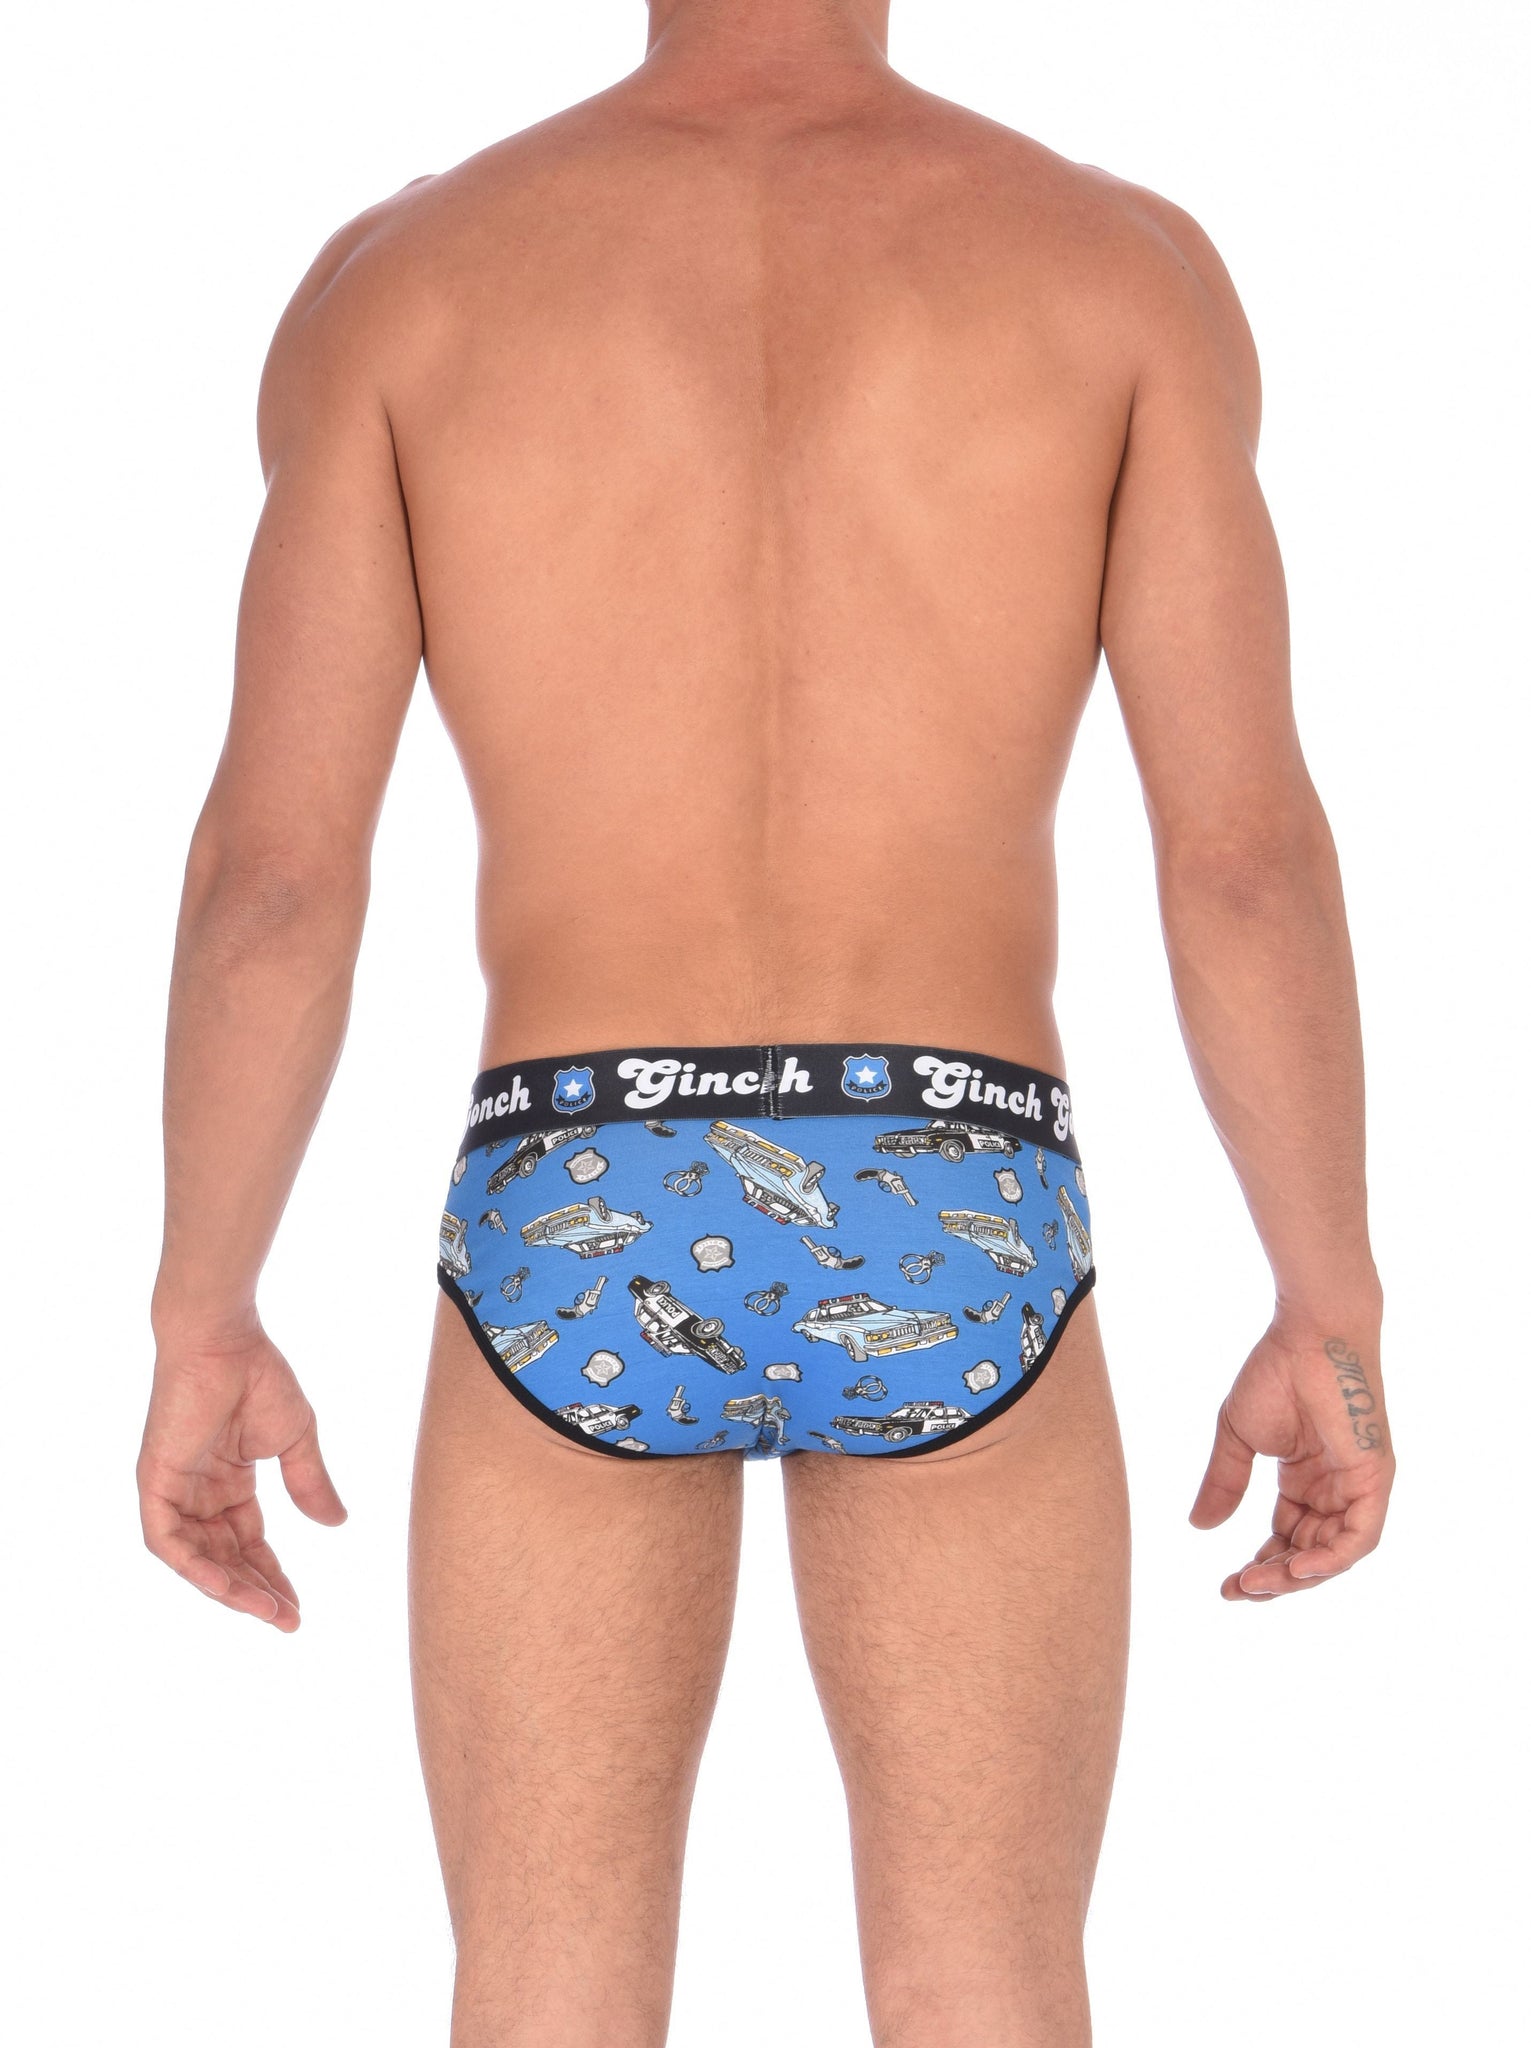 Ginch Gonch GG Patrol low rise y front Brief men's underwear blue fabric with cop cars, badges, hand cuffs, and guns. Black trim and black printed waistband back